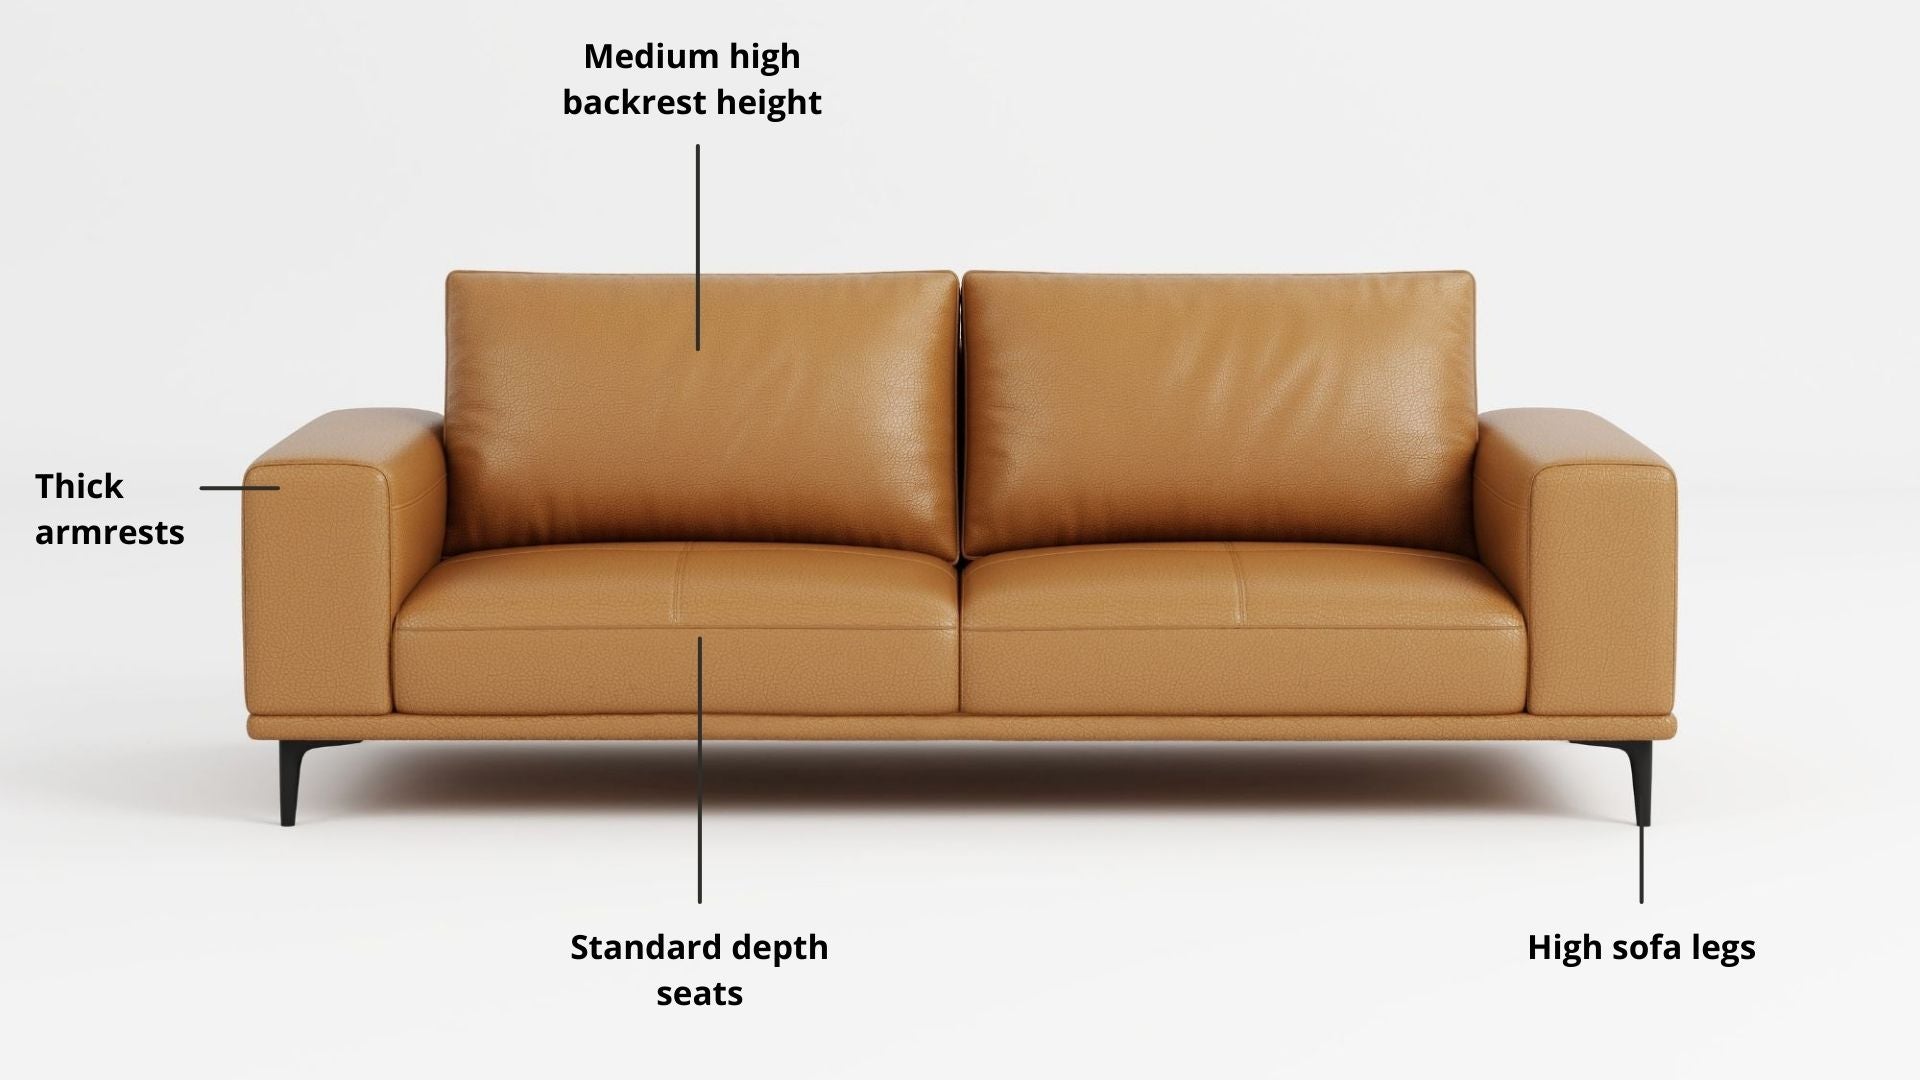 Key features such as armrest thickness, cushion height, seat depth and sofa leg height for Calm Full Leather Sofa